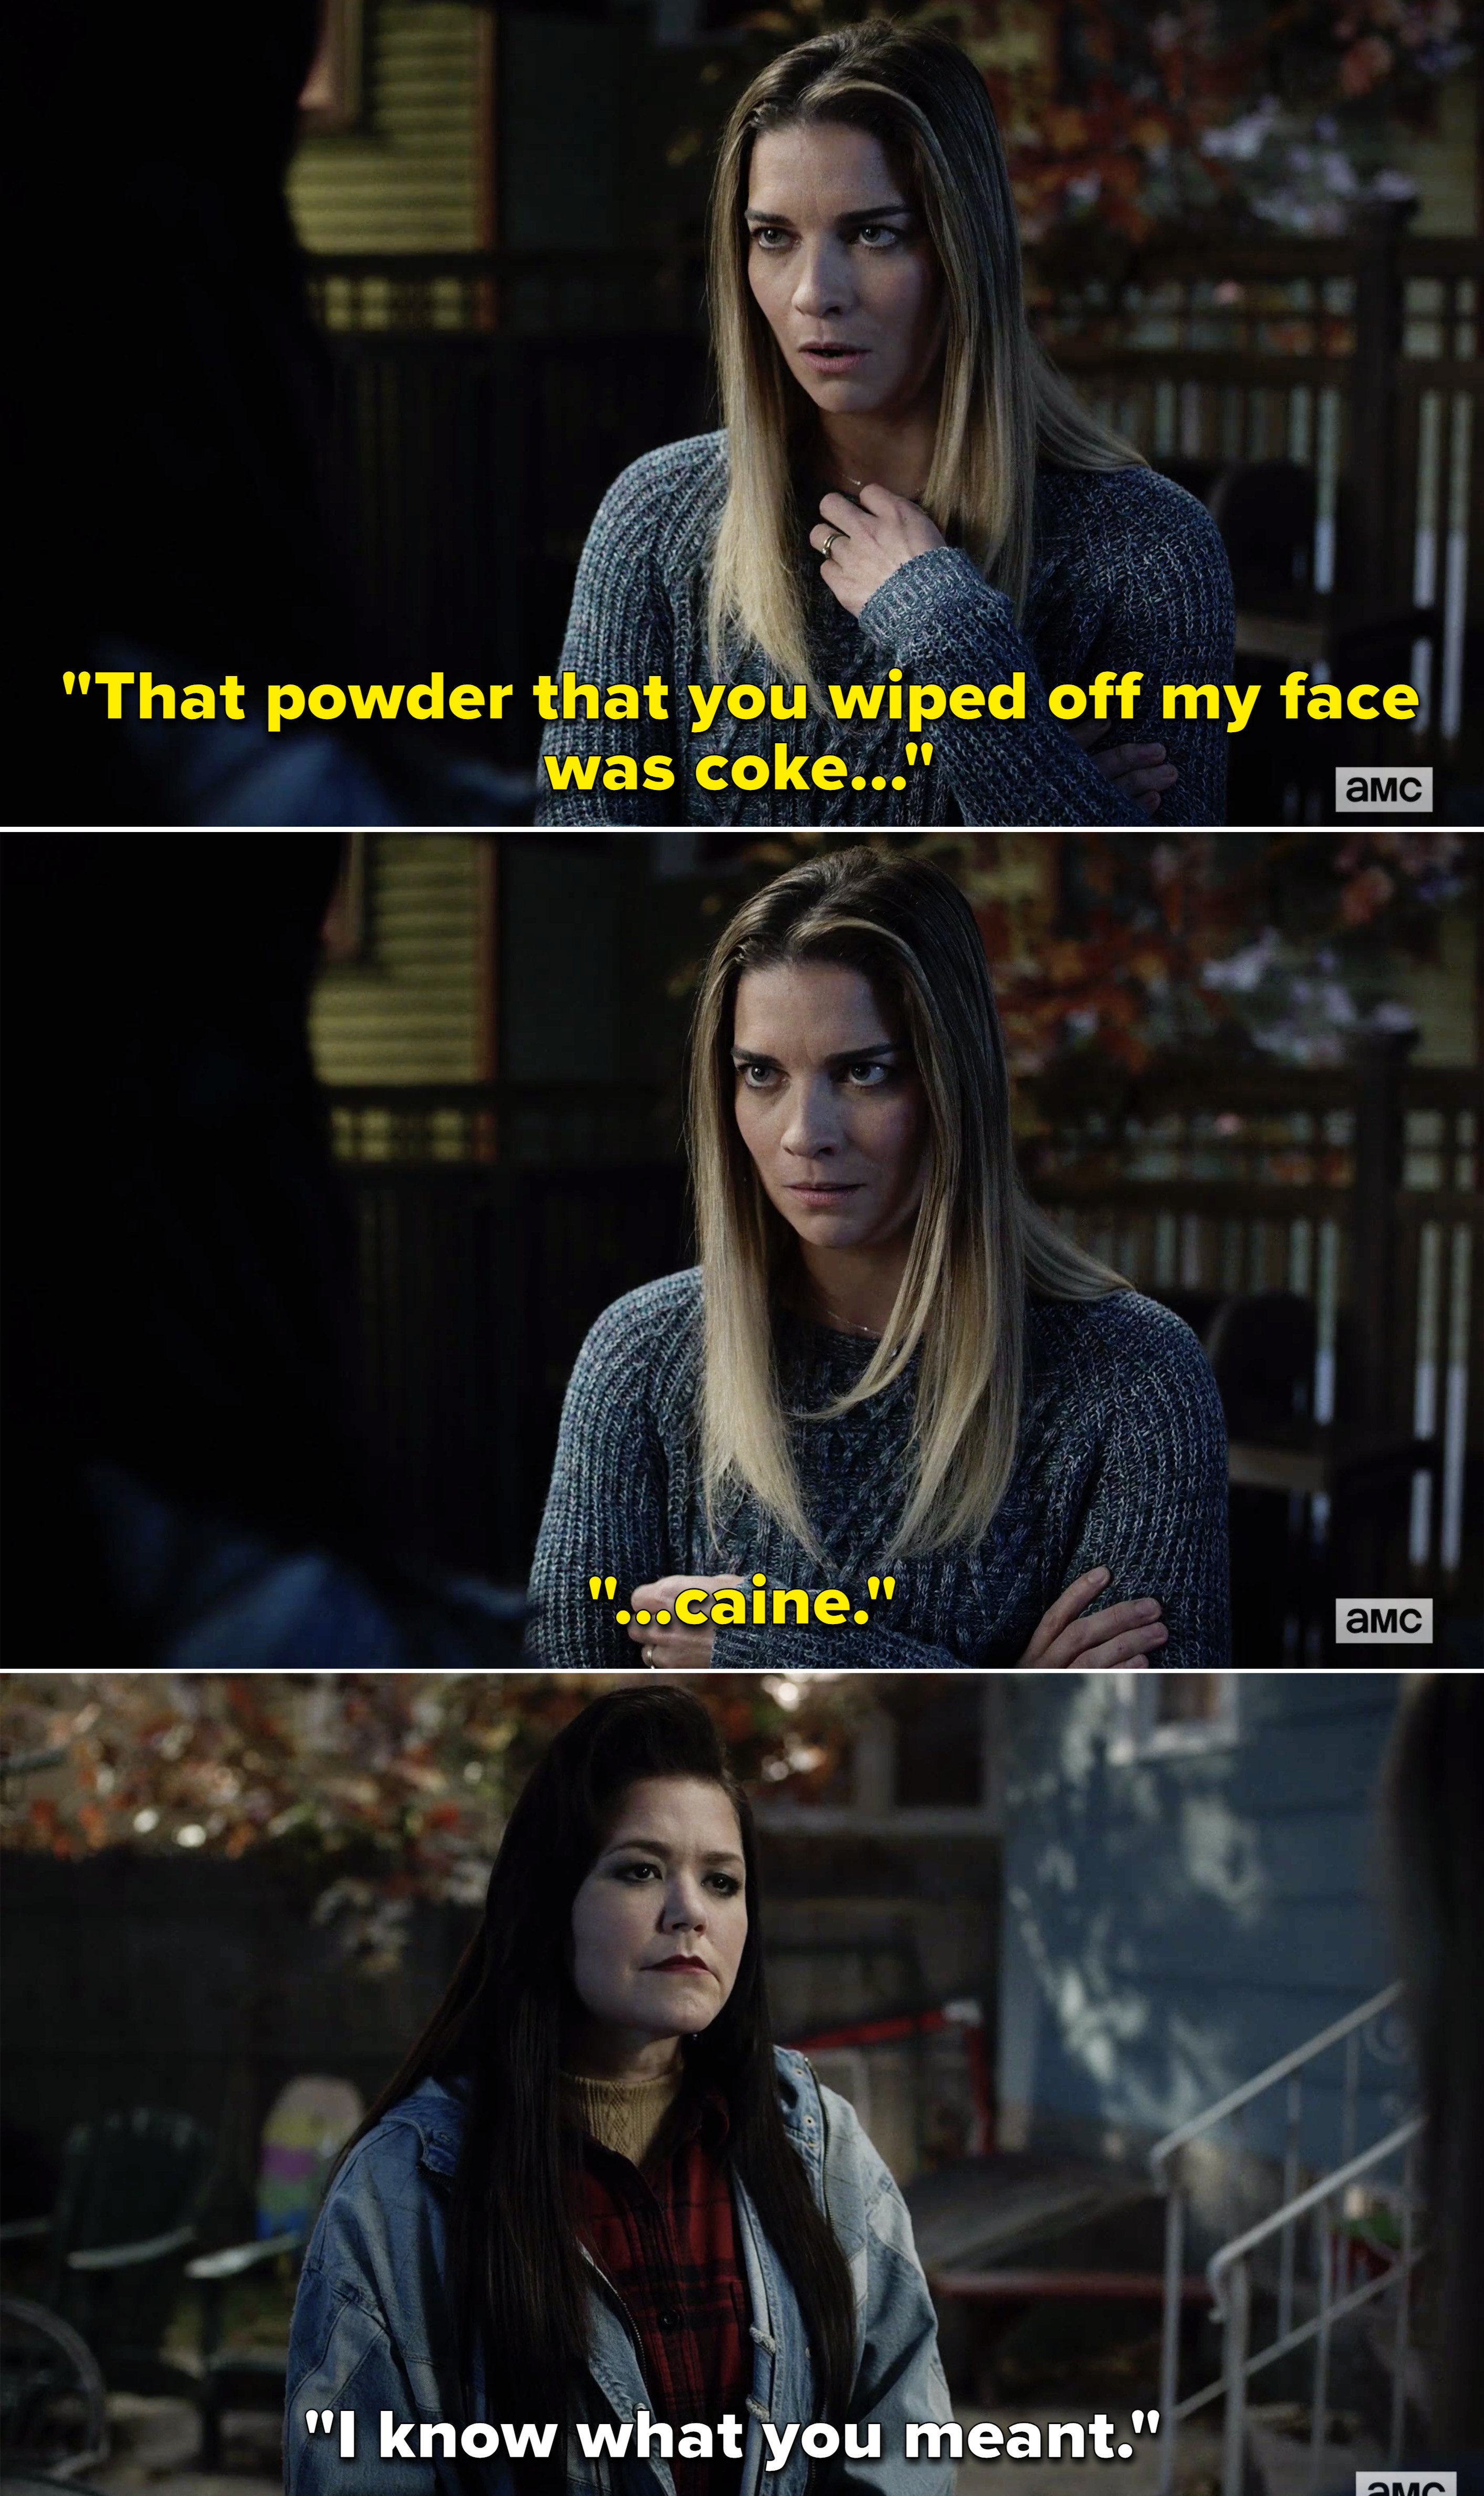 Allison telling Patty, &quot;That powder you wiped off my face was coke...caine&quot;